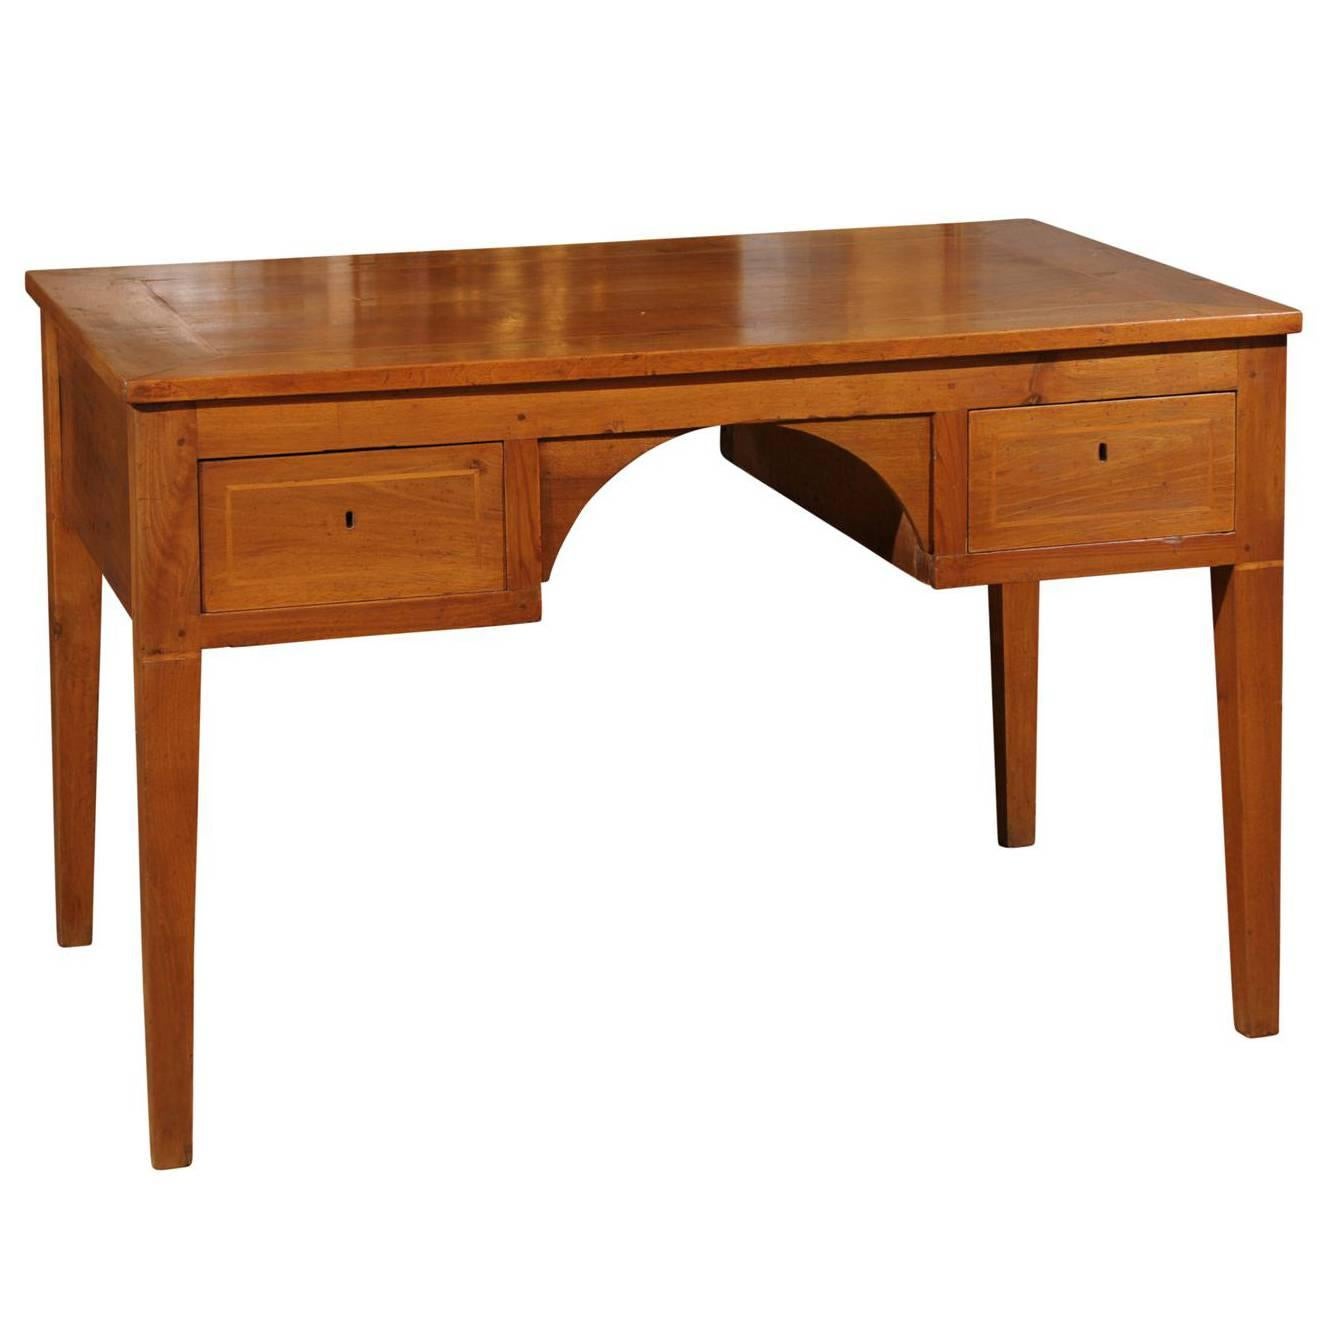 Italian 1880s Walnut Partner’s Desk with Banded Inlay and Arched Apron